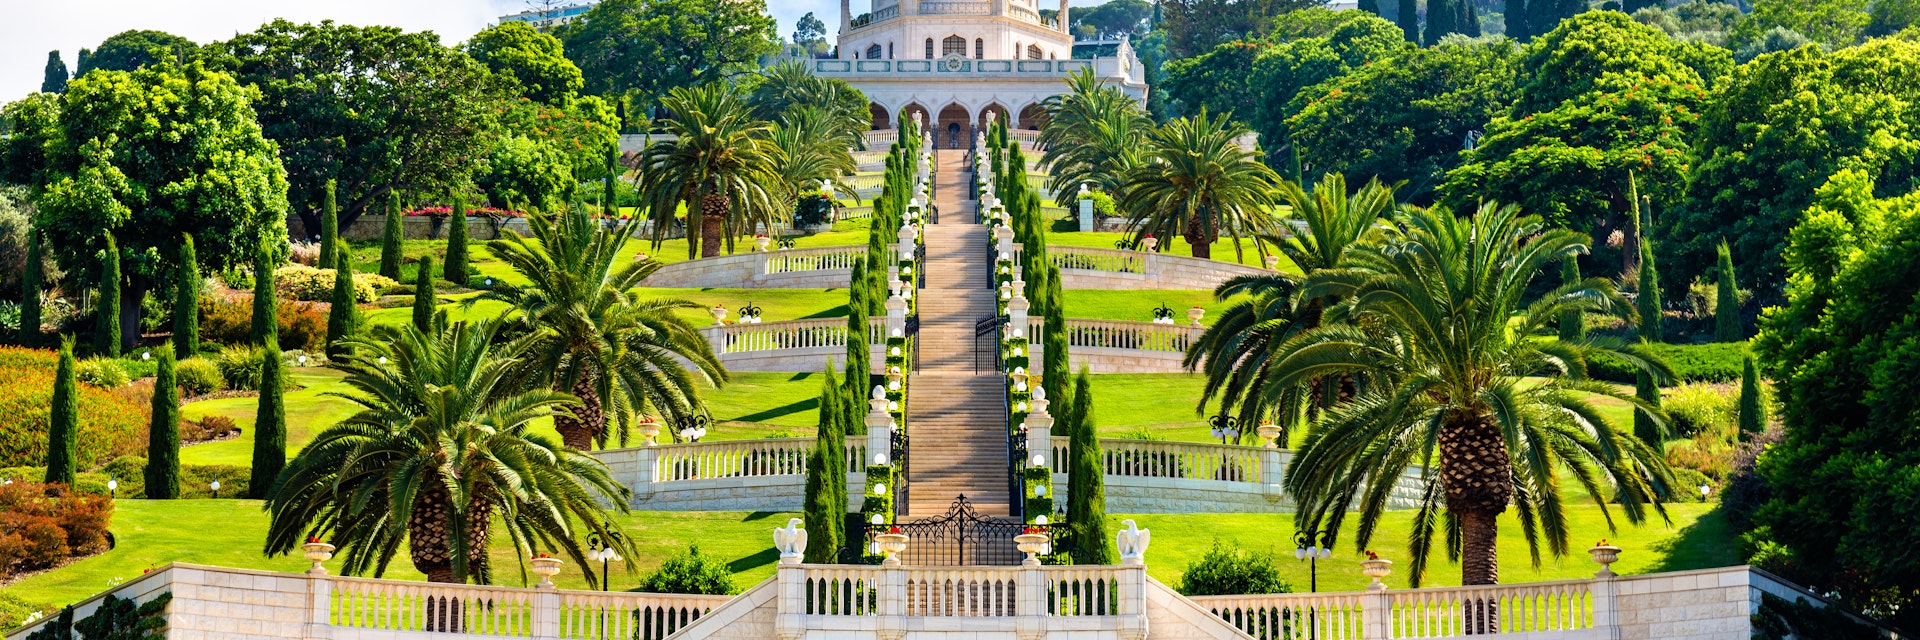 Shrine of the Bab and lower terraces at the Bahai World Center in Haifa, Israel.